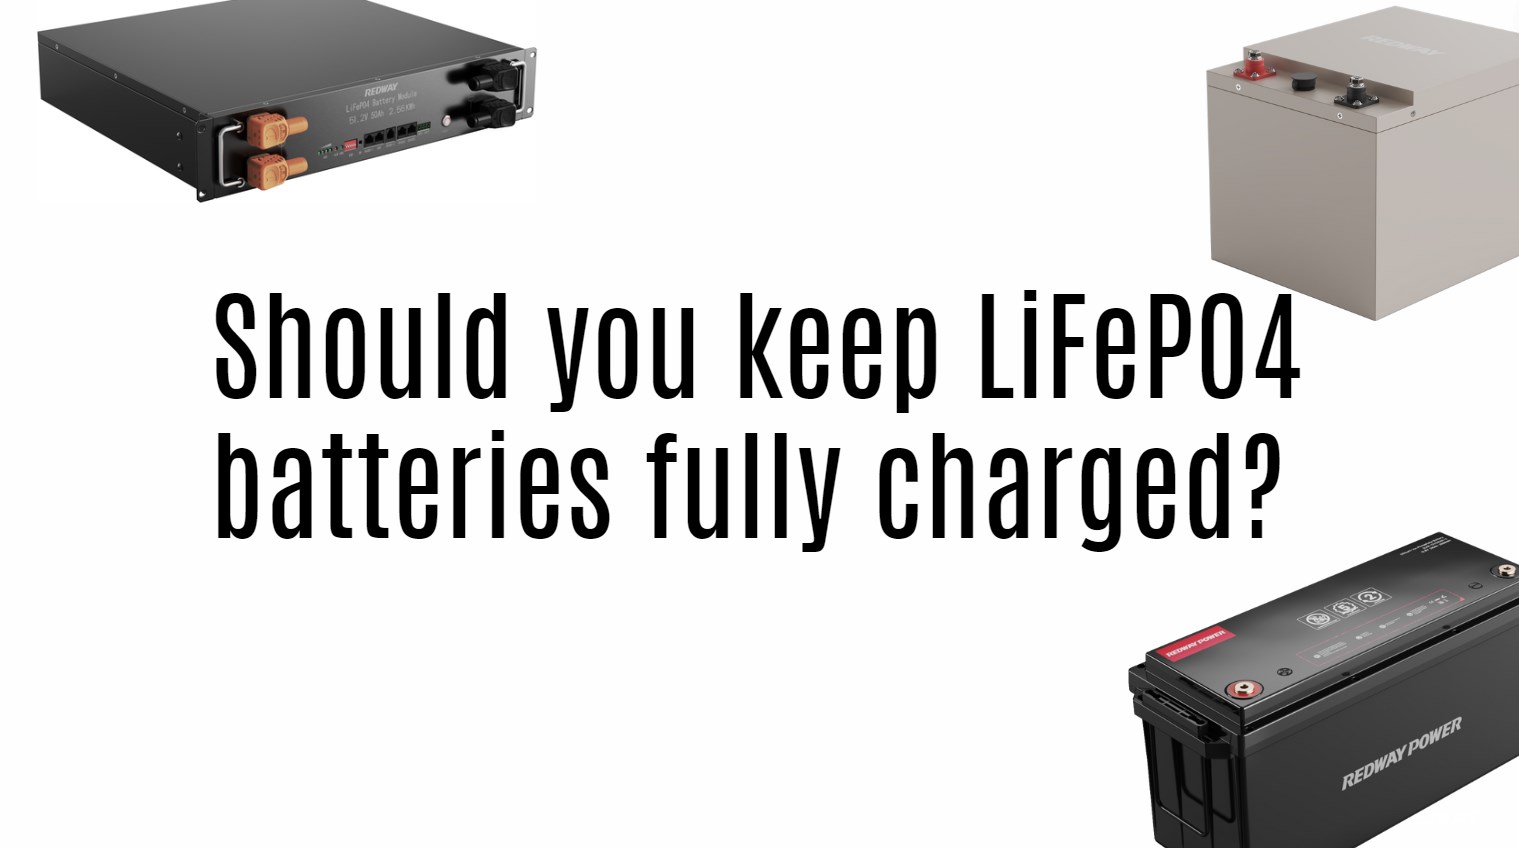 Should you keep LiFePO4 batteries fully charged?